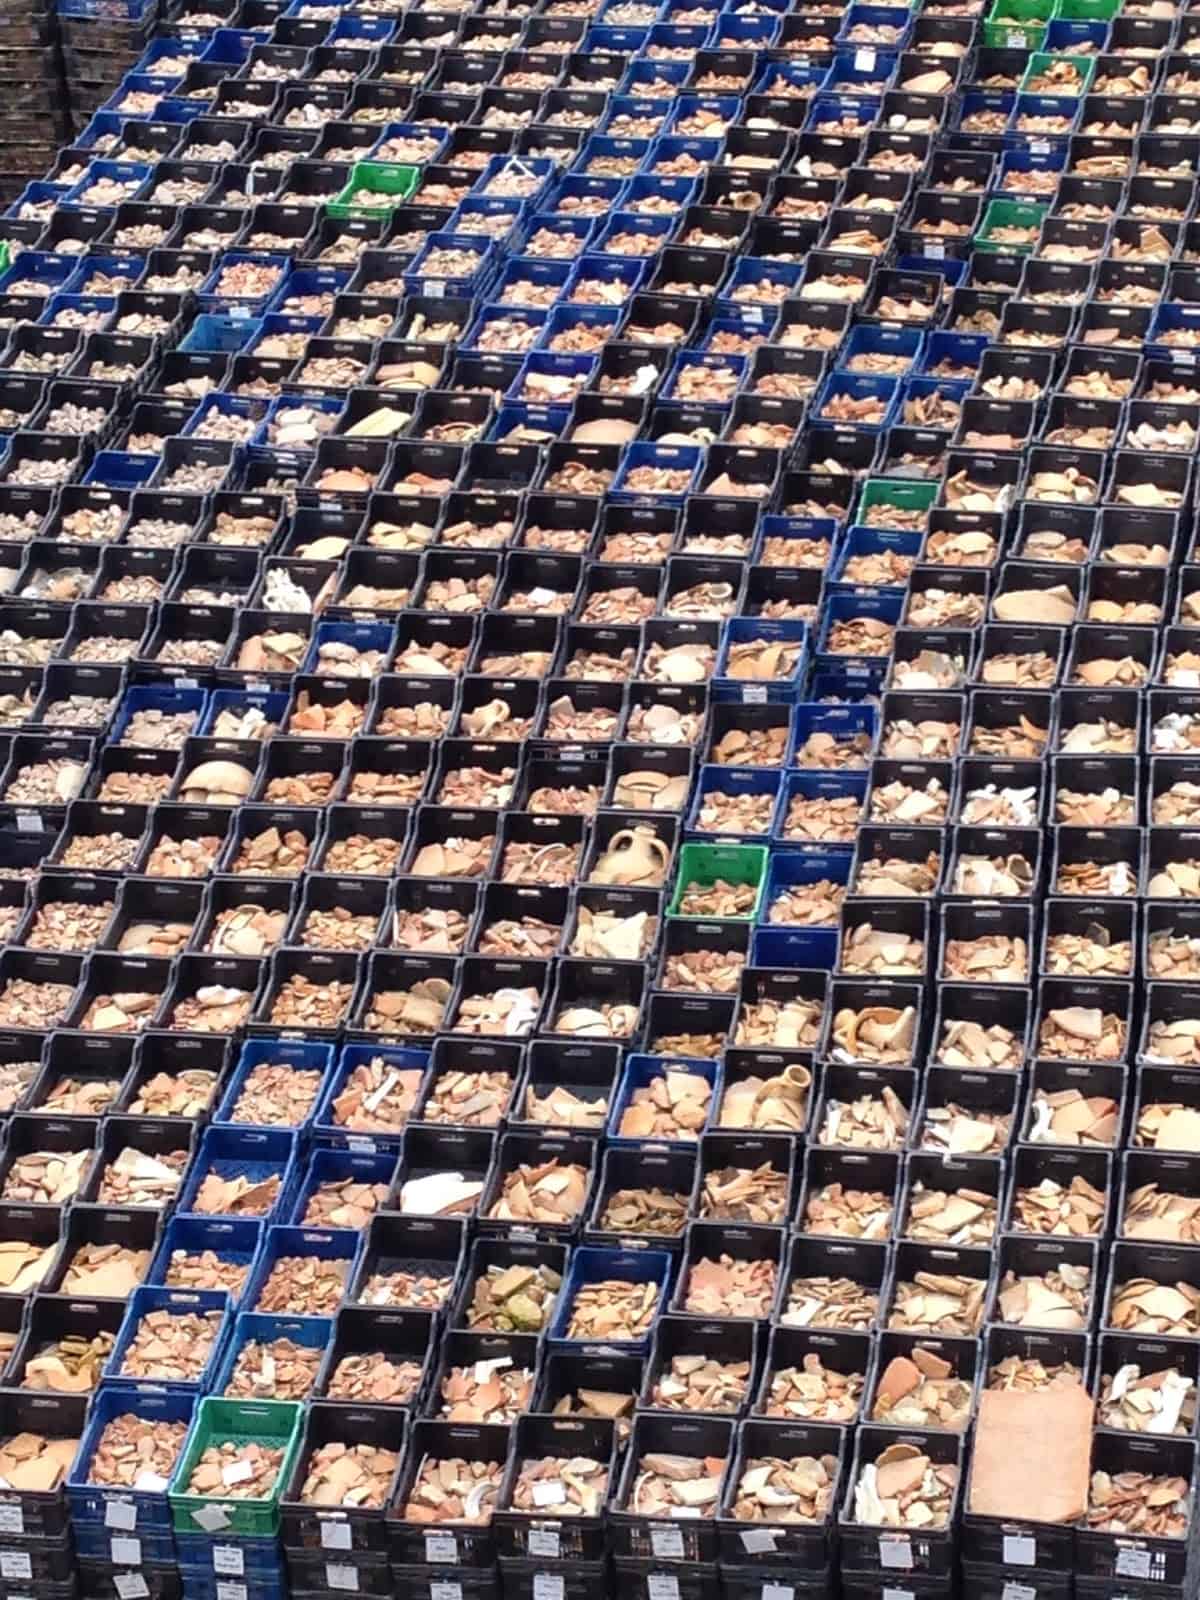 My mouth is watering looking at all these crates… Harbor of Eleutherios, Yenikapı, Istanbul, Turkey